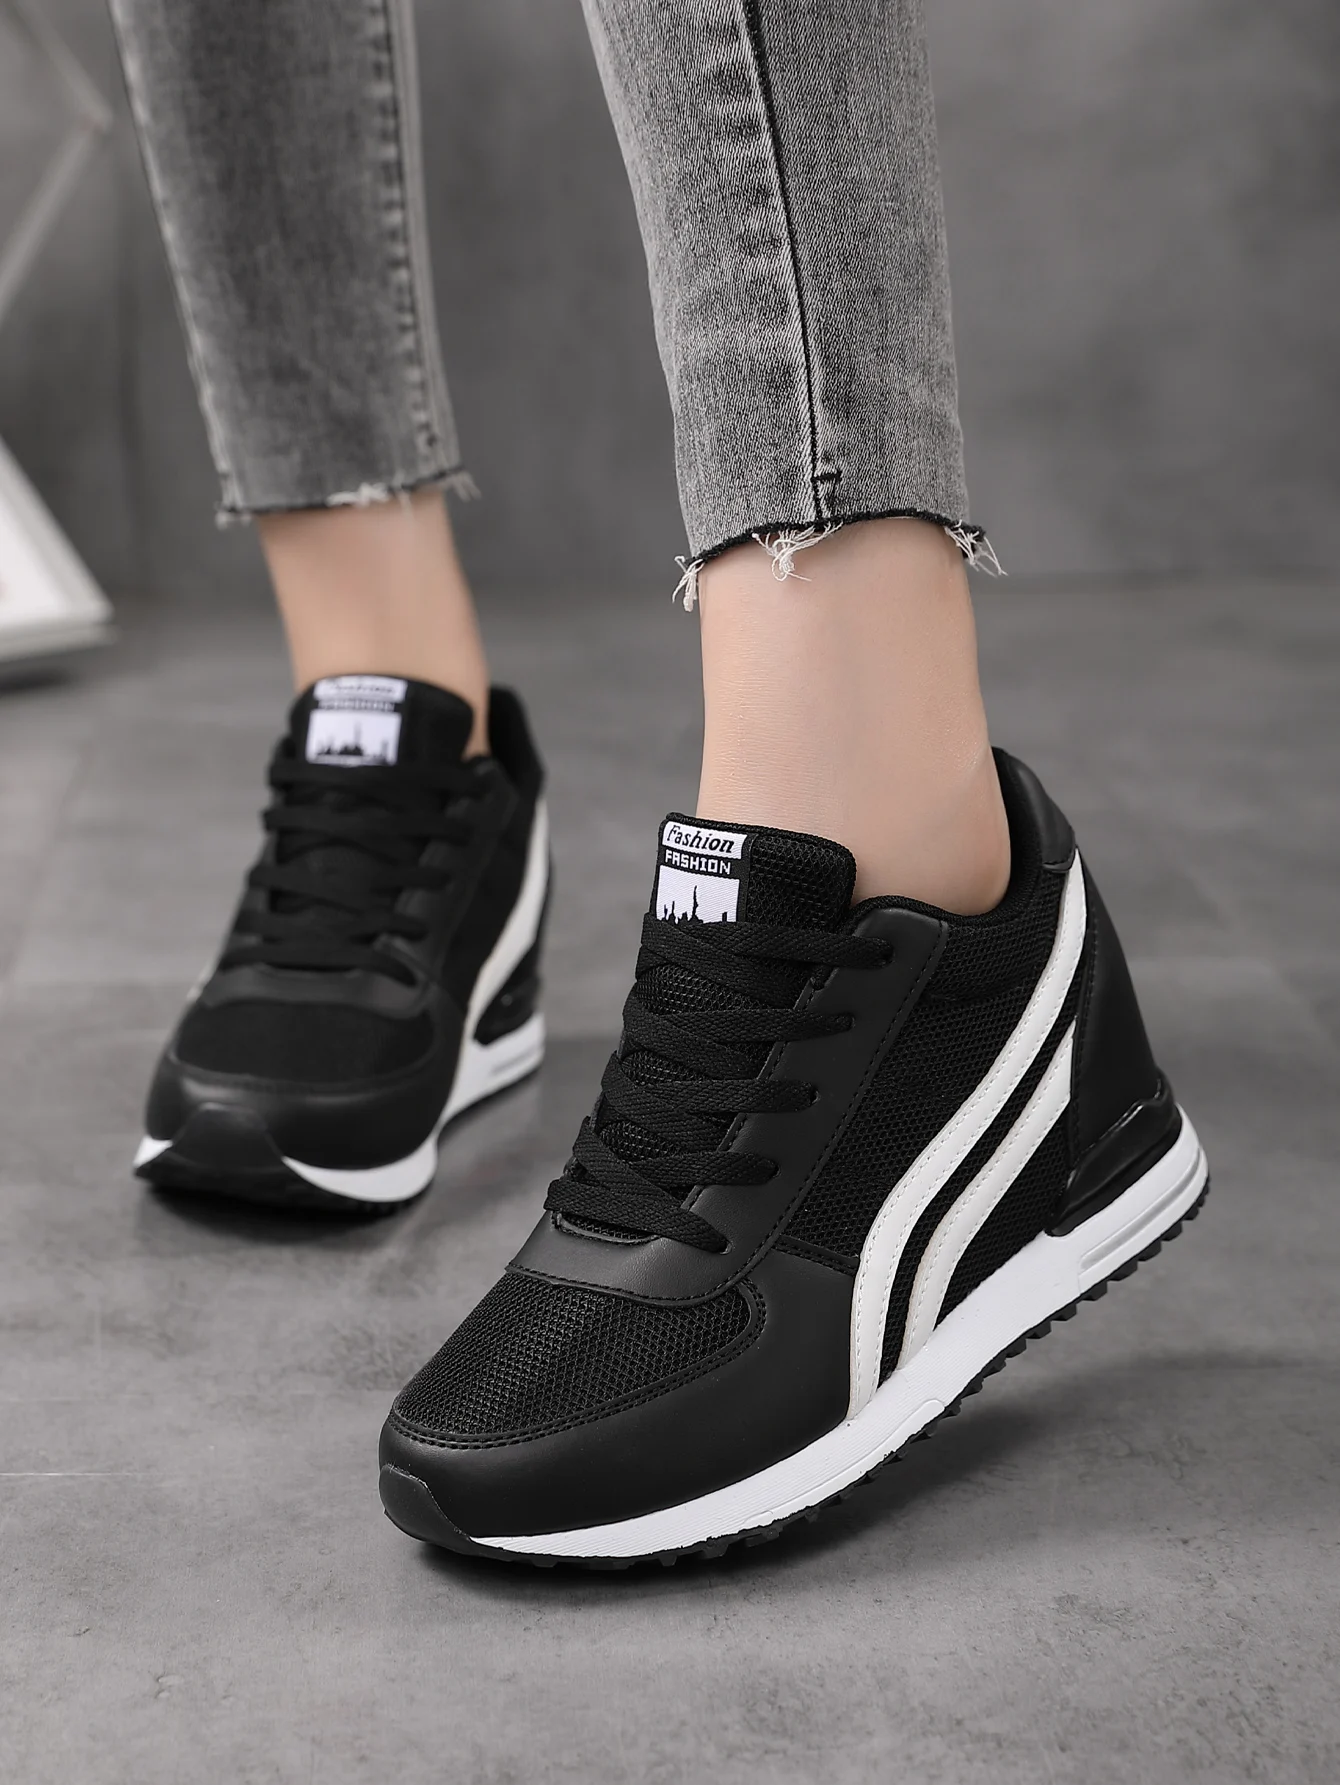 

2024 New Fashion Shoes Plataforma Women Shoes Low Price Girls Increased Internal White PU Casual Wedge Sneakers Black